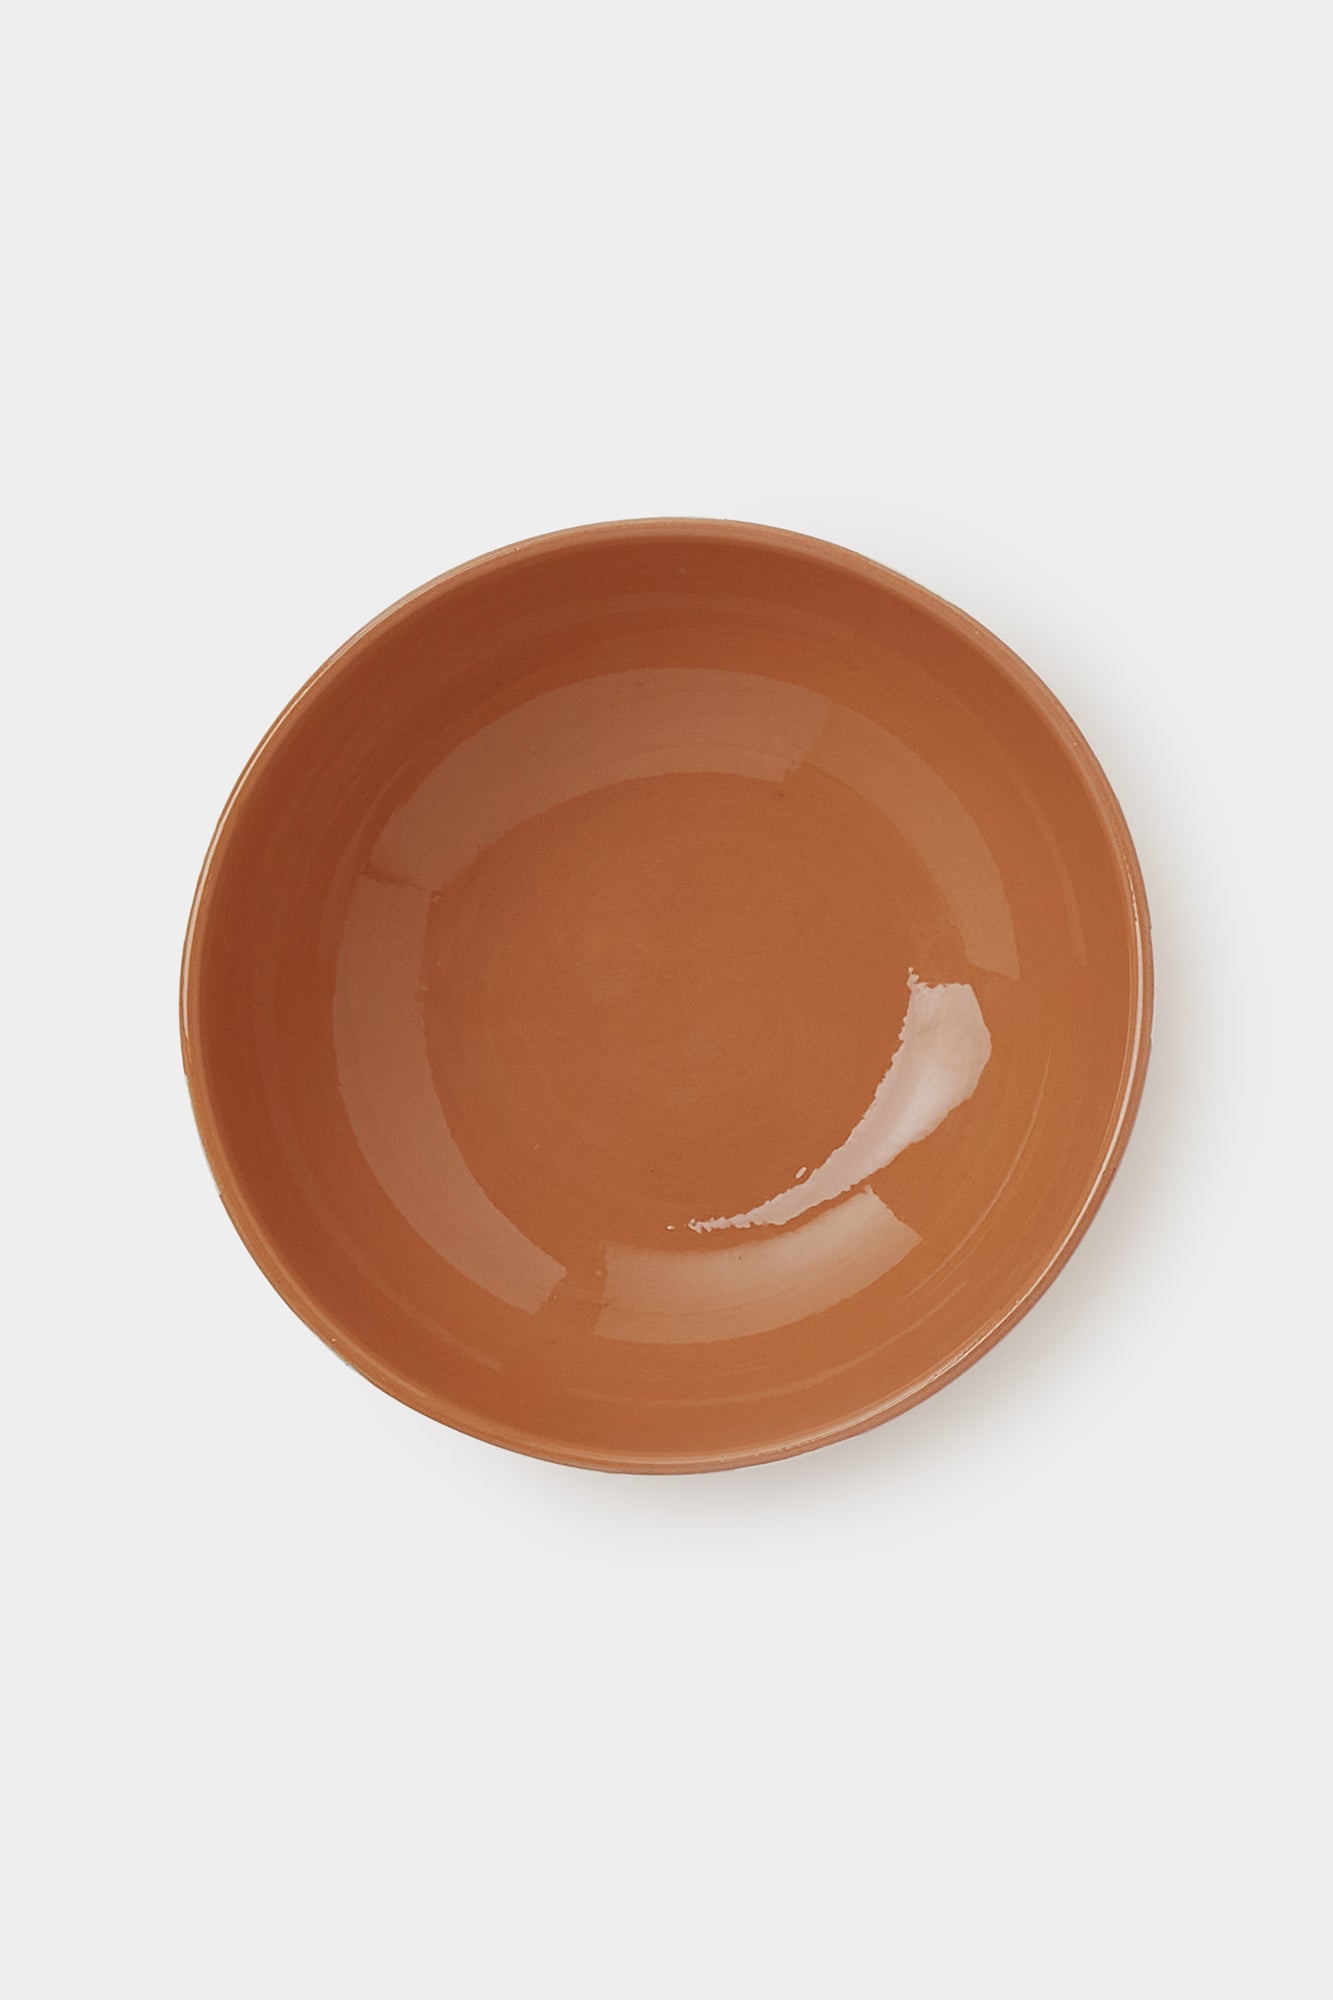 WHITE TERRACOTTA BELLISOTTO SOUP PLATE